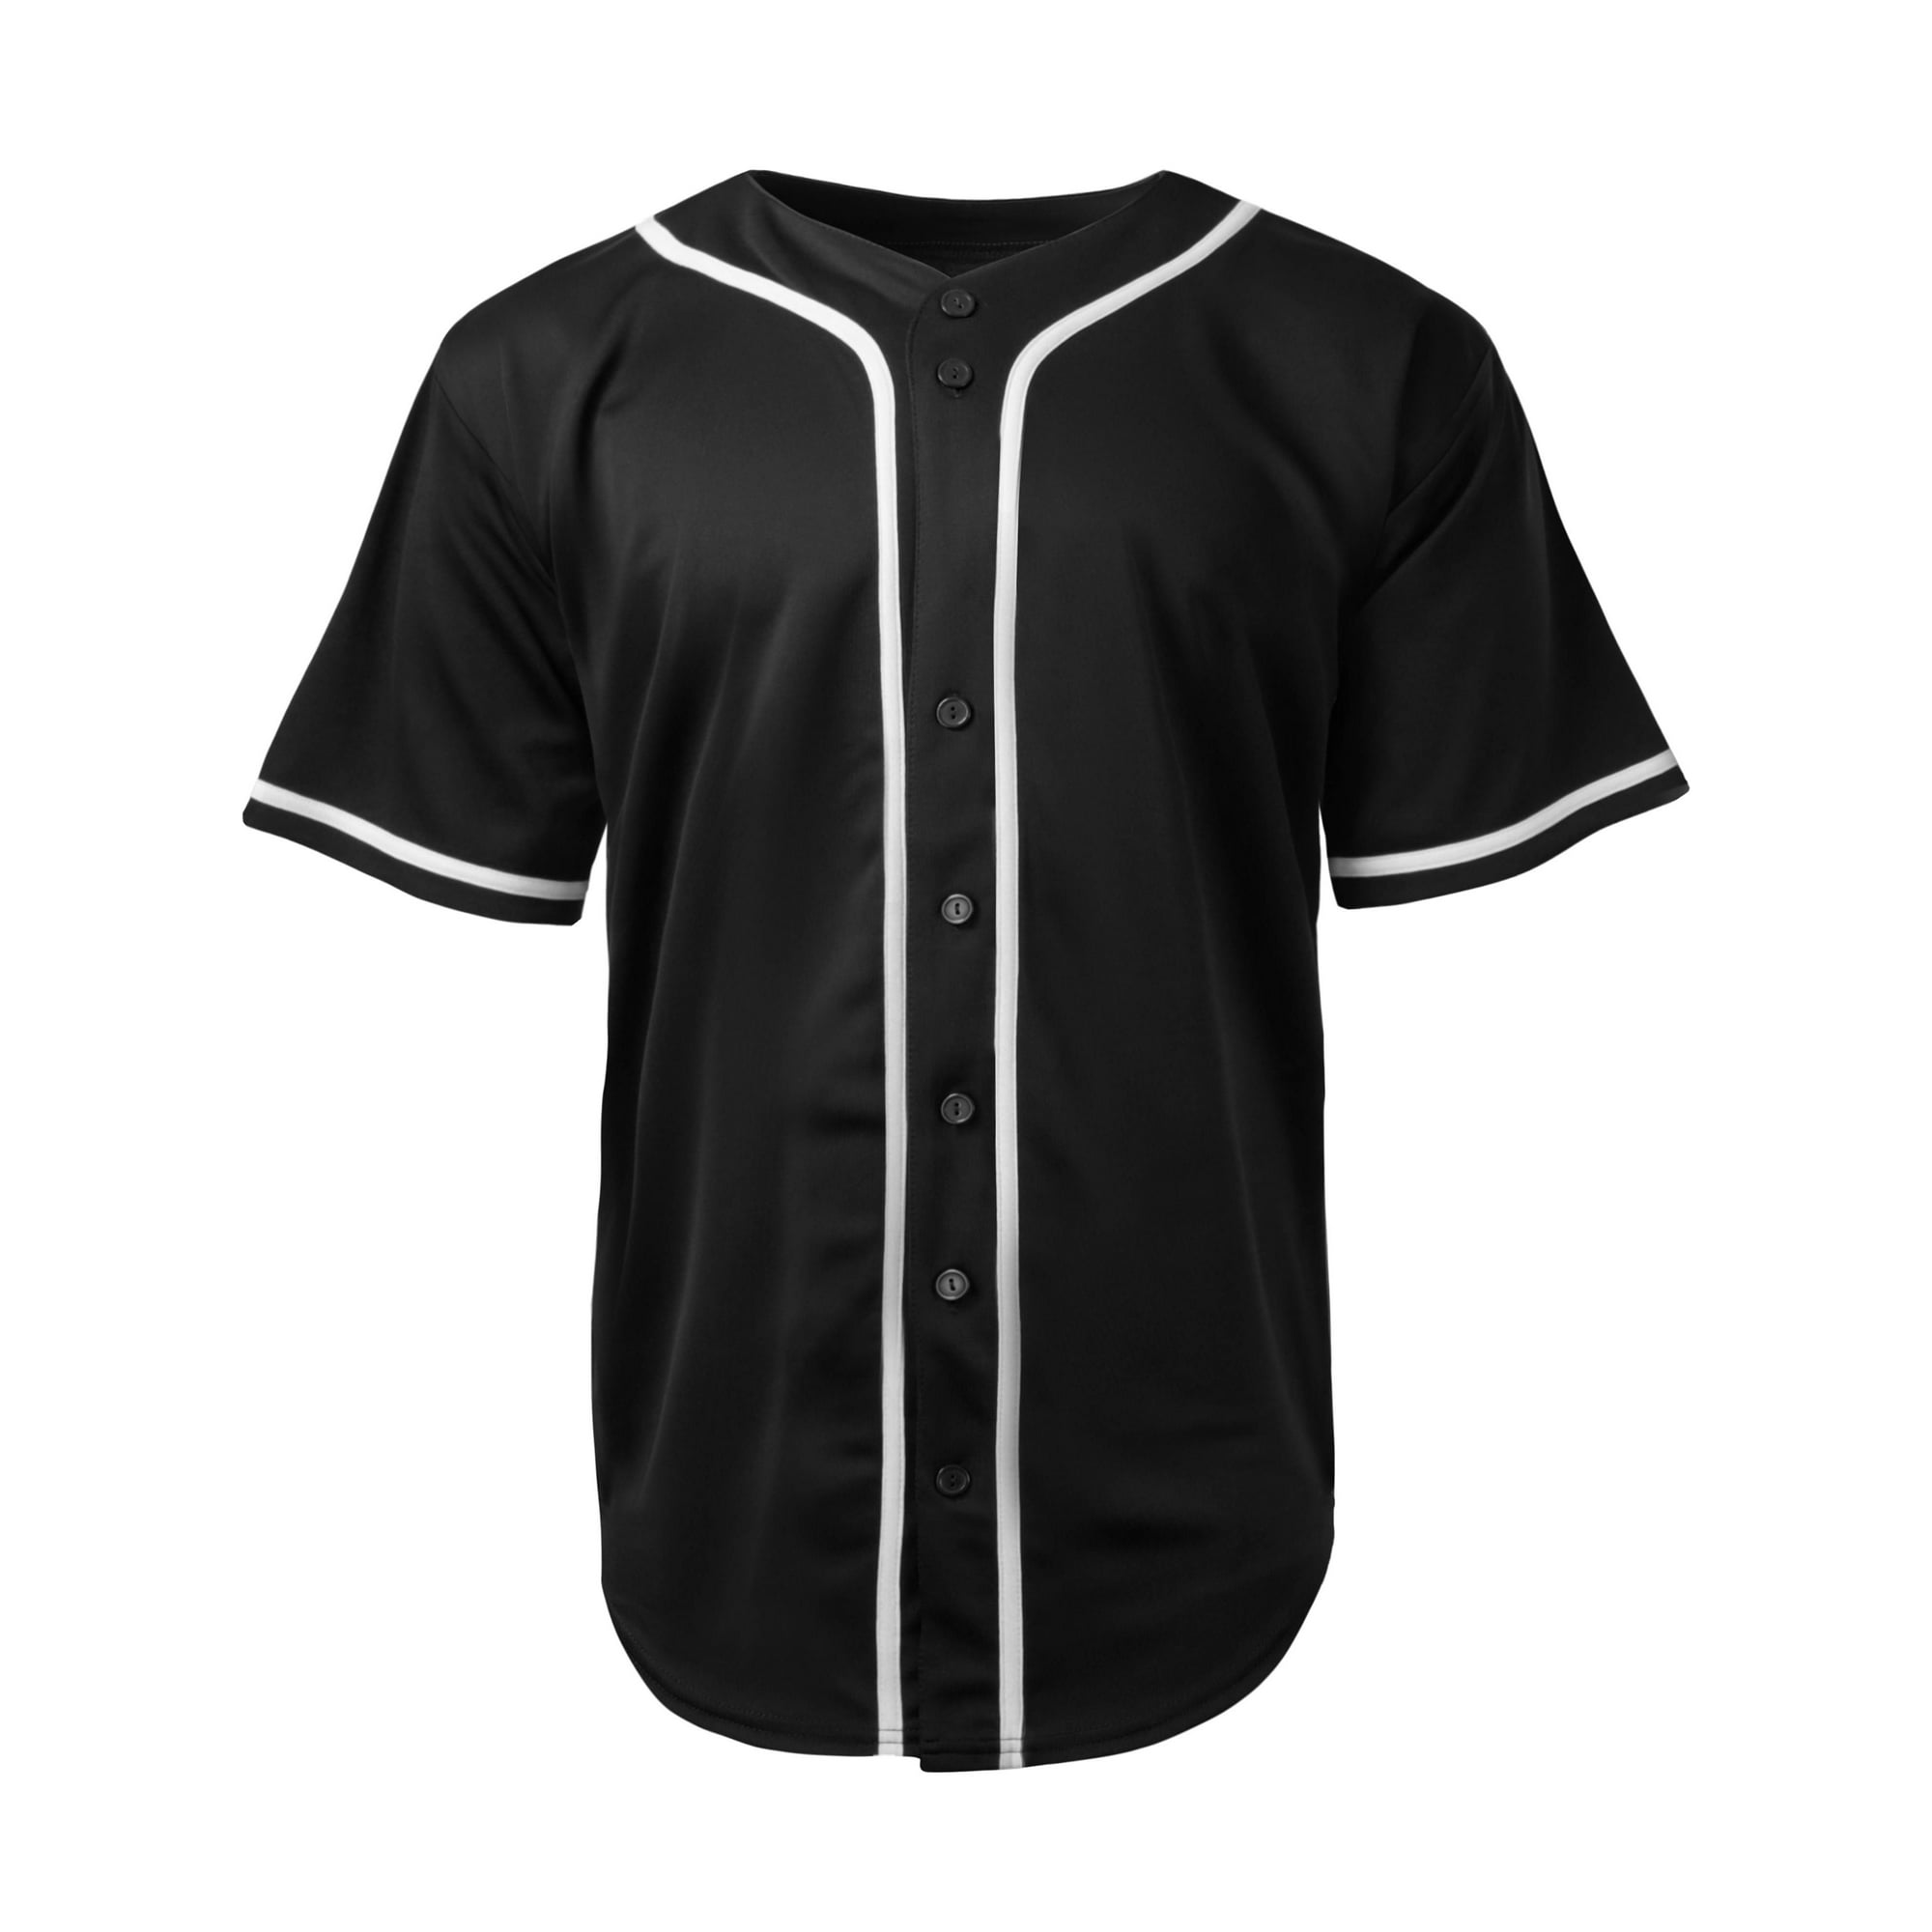 Ma Croix Mens Team Sports Printable Blank Jersey Baseball Collar Button Up T Shirts, Men's, Size: Large, Black